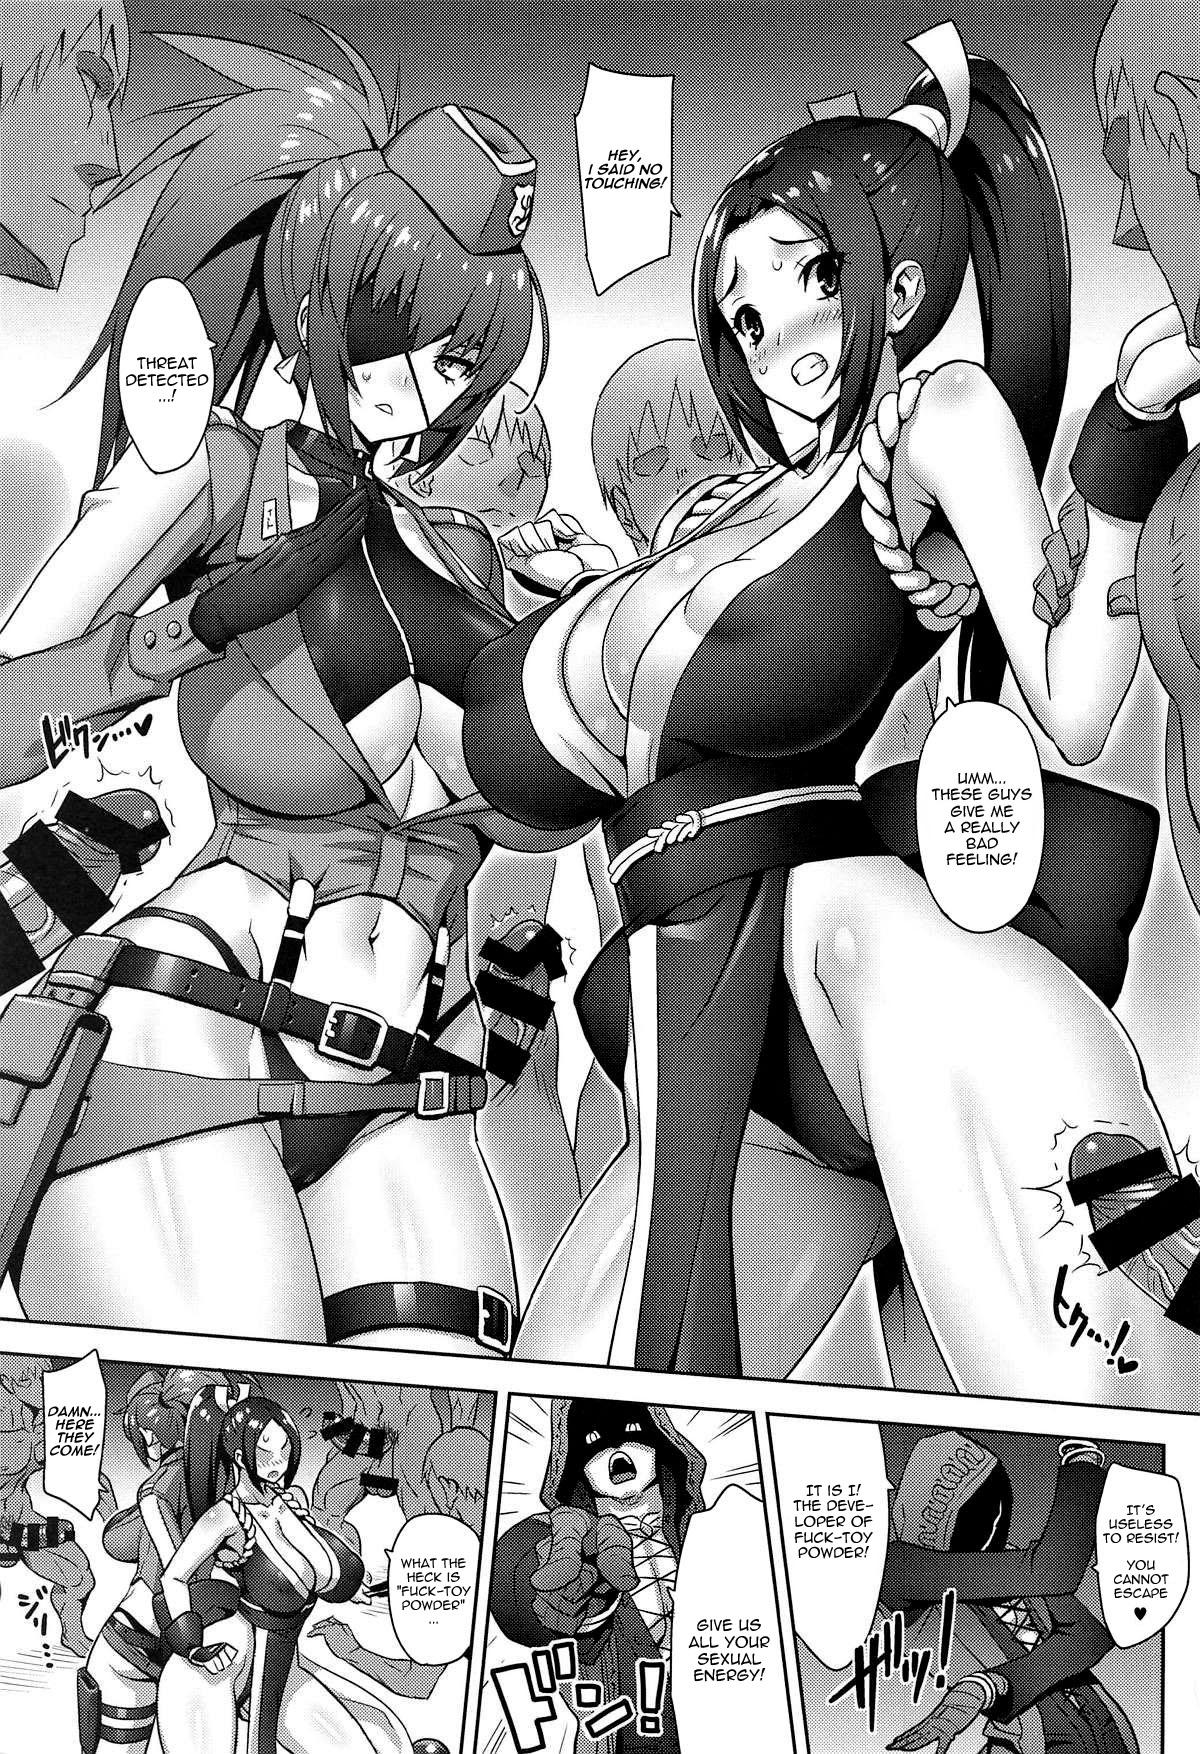 Closeup JIGGLING FIGHTERS - King of fighters Young Tits - Page 2